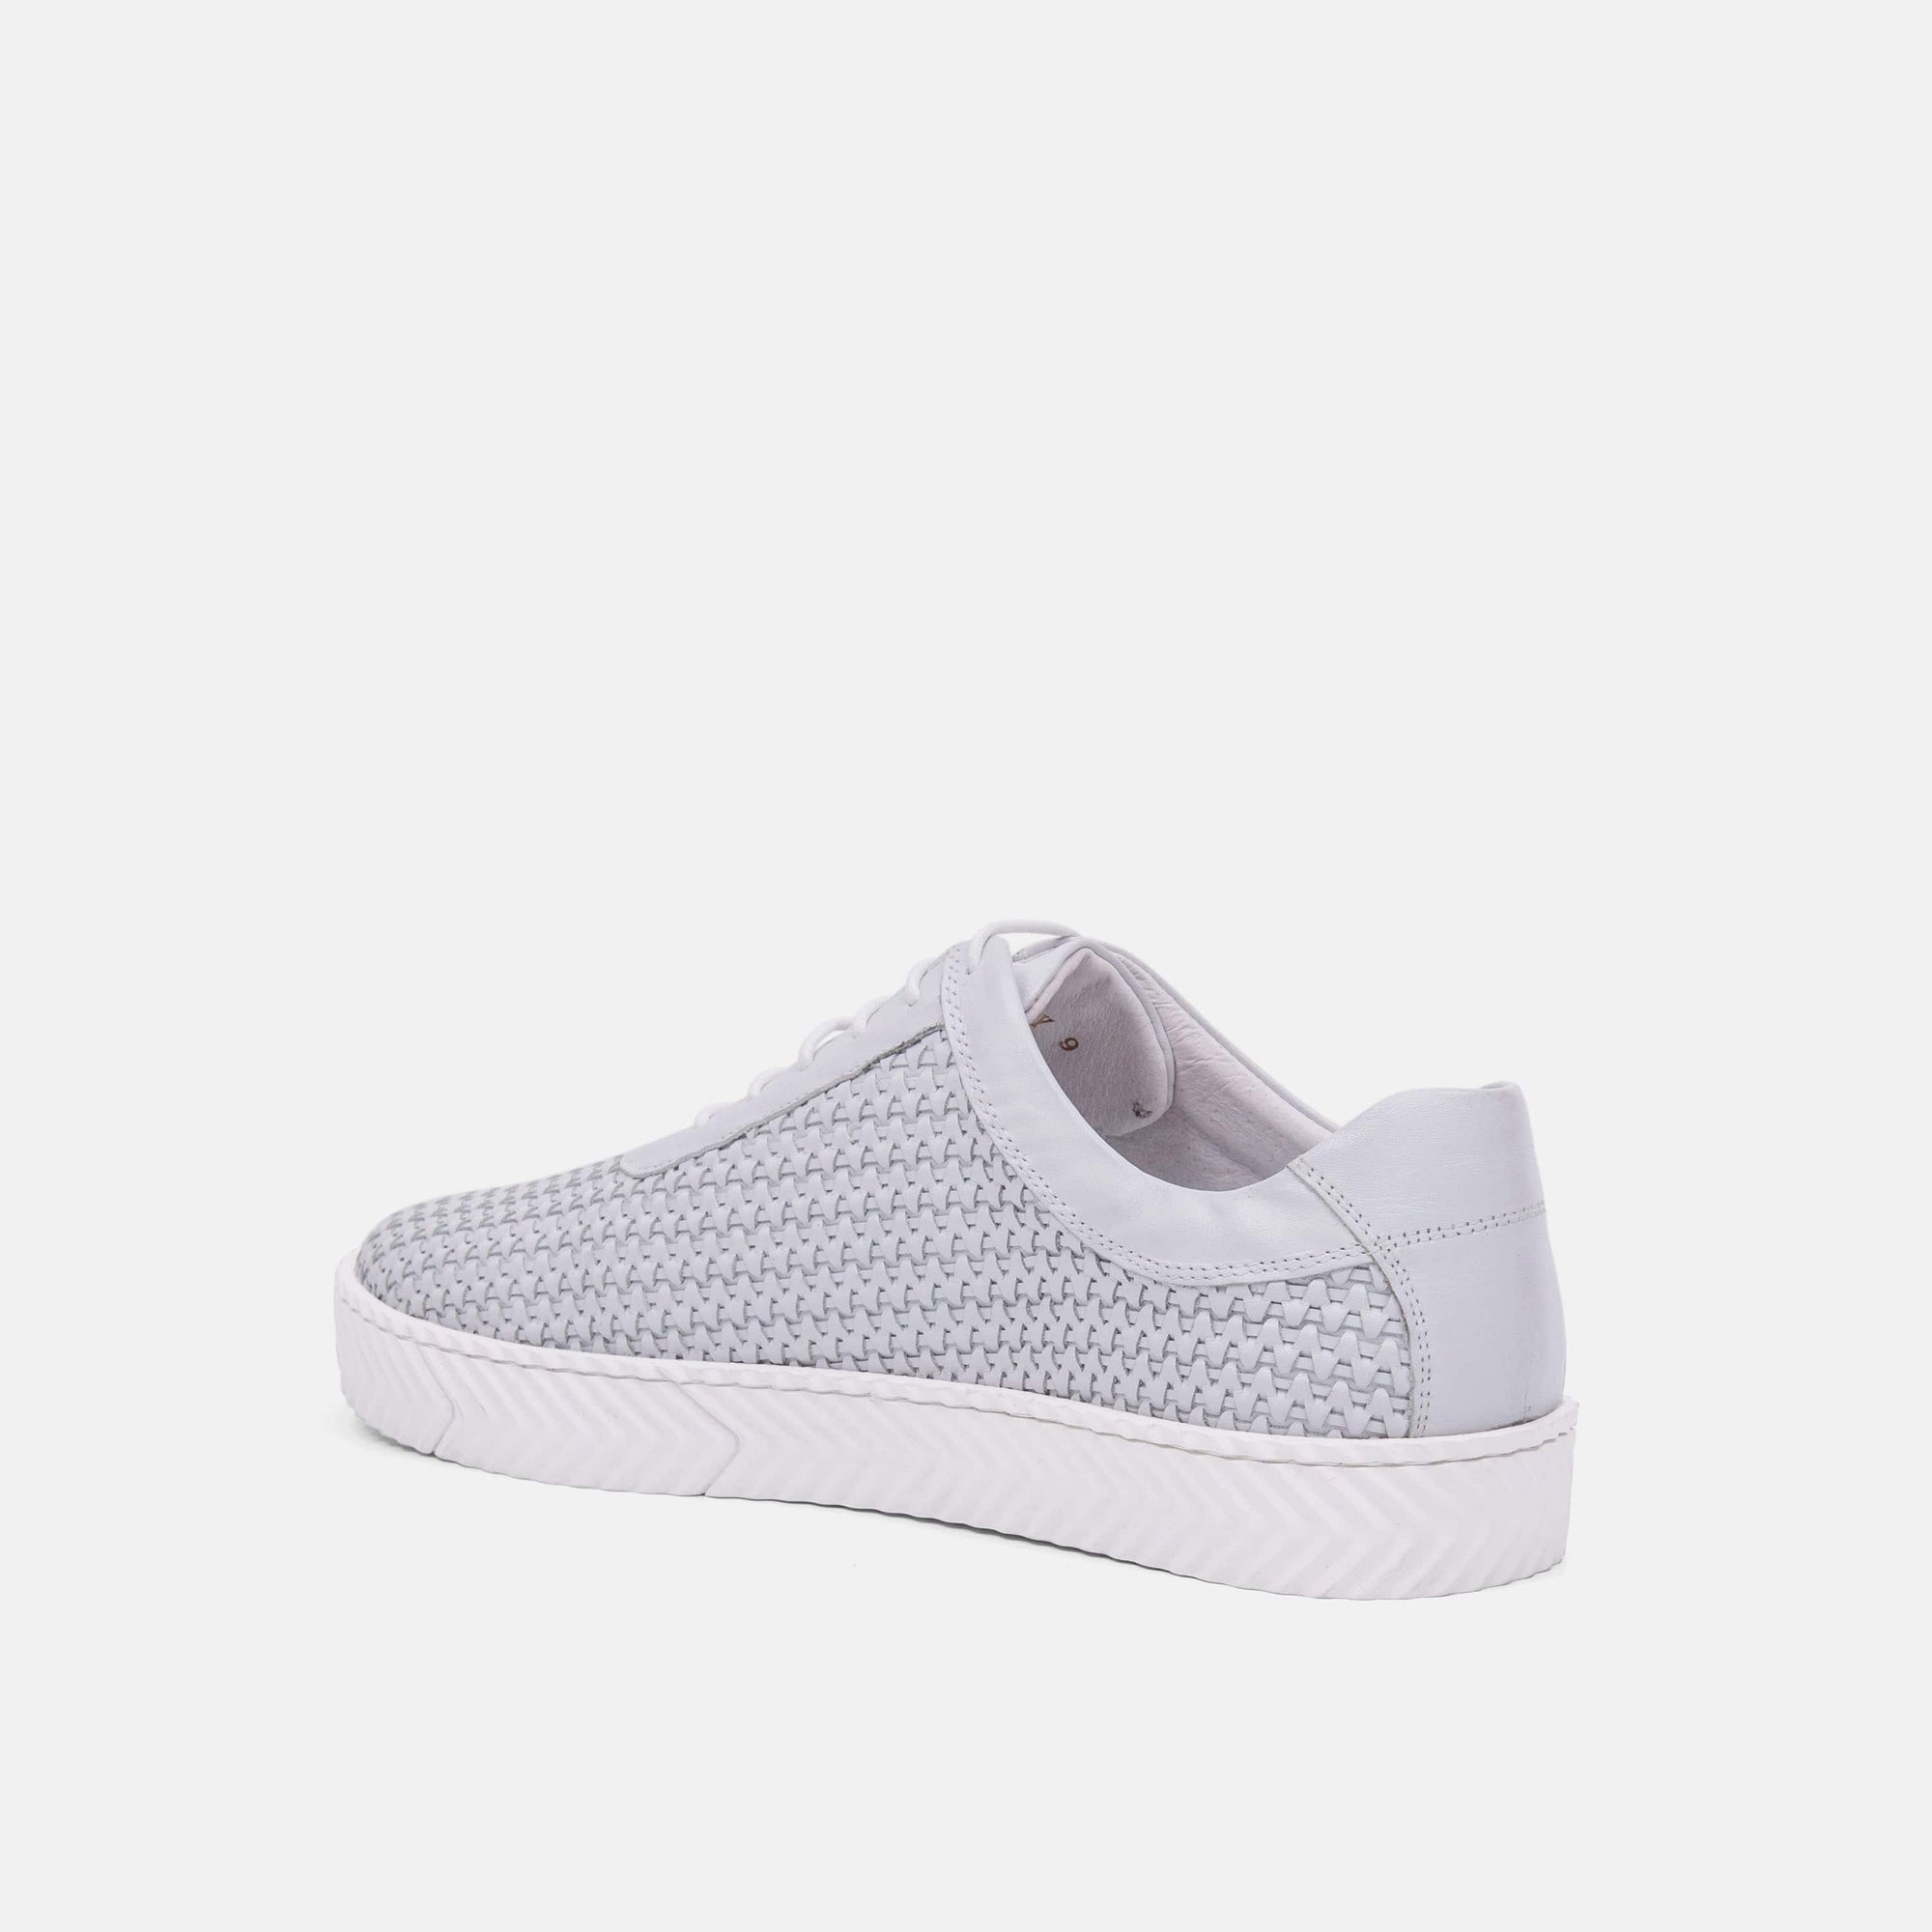 Cody White Woven Leather Lace up Sneakers